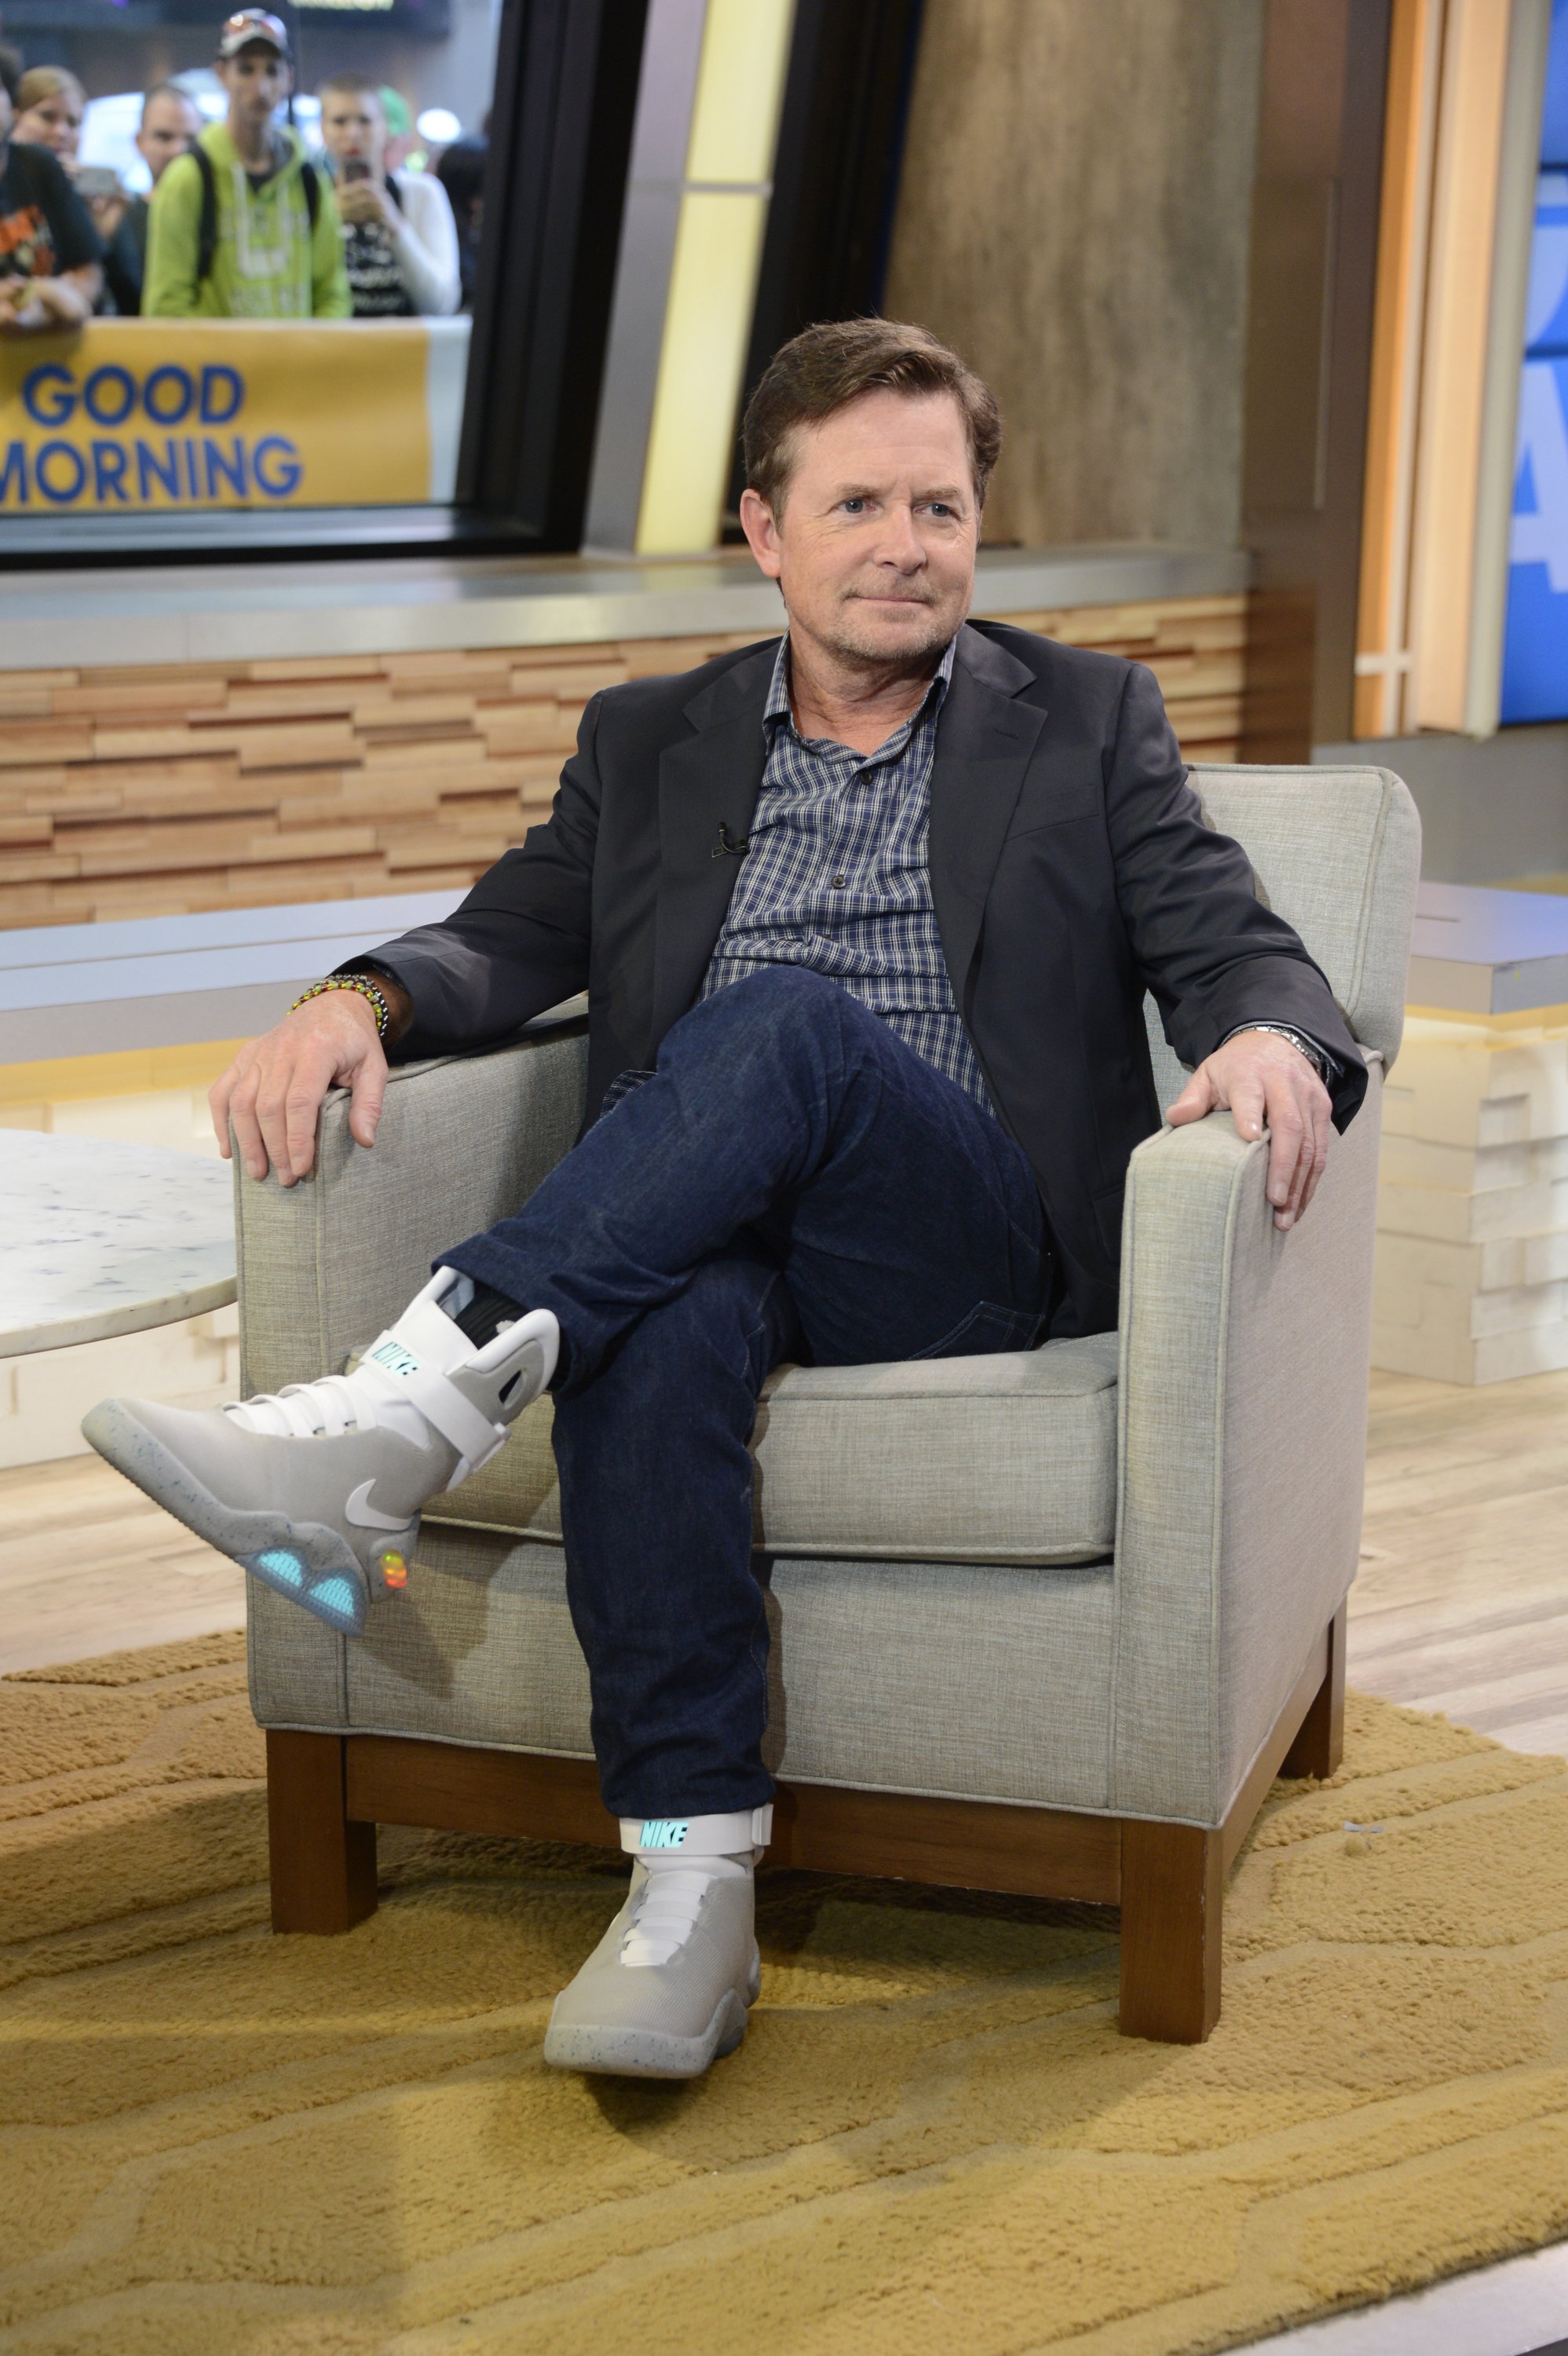 Michael J. Fox bei "Good Morning America", 2016 | Quelle: Getty Images